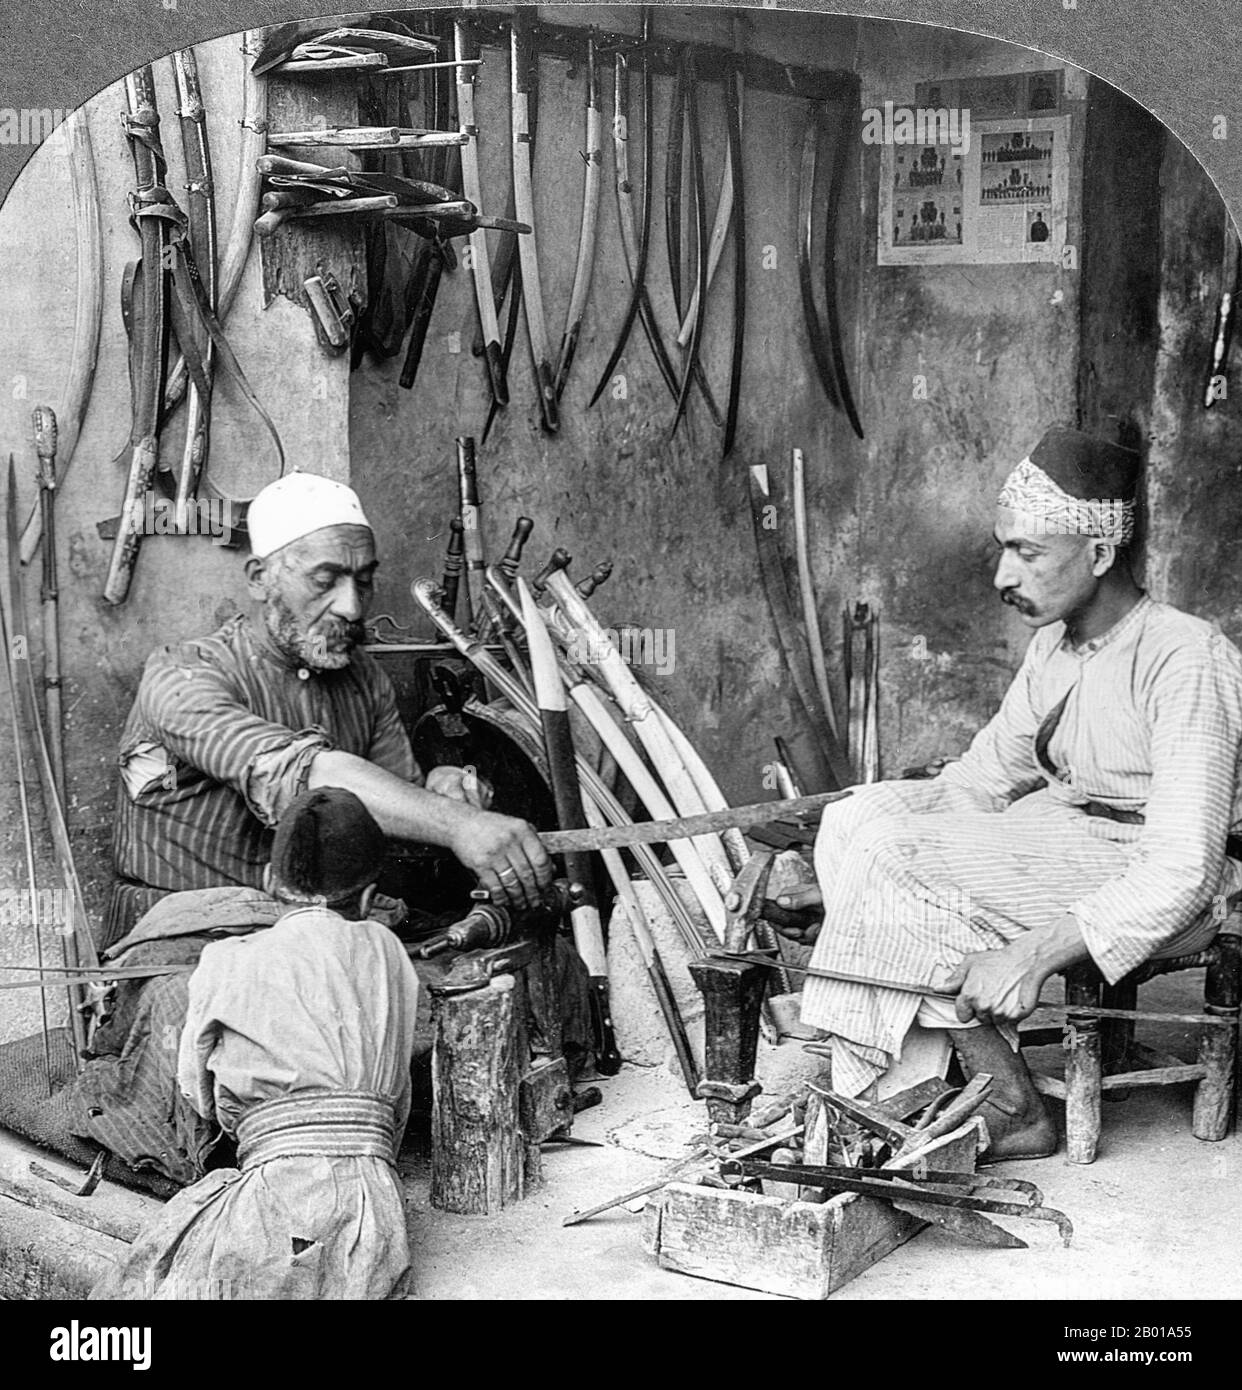 Syria: Sword-makers in Damascus, c. 1900.  Damascus steel was a term used by several Western cultures from the Medieval period onward to describe a type of steel used in swordmaking from about 300 BC to 1700 AD. These swords are characterized by distinctive patterns of banding and mottling reminiscent of flowing water. Such blades were reputed to be not only tough and resistant to shattering, but capable of being honed to a sharp and resilient edge. Stock Photo